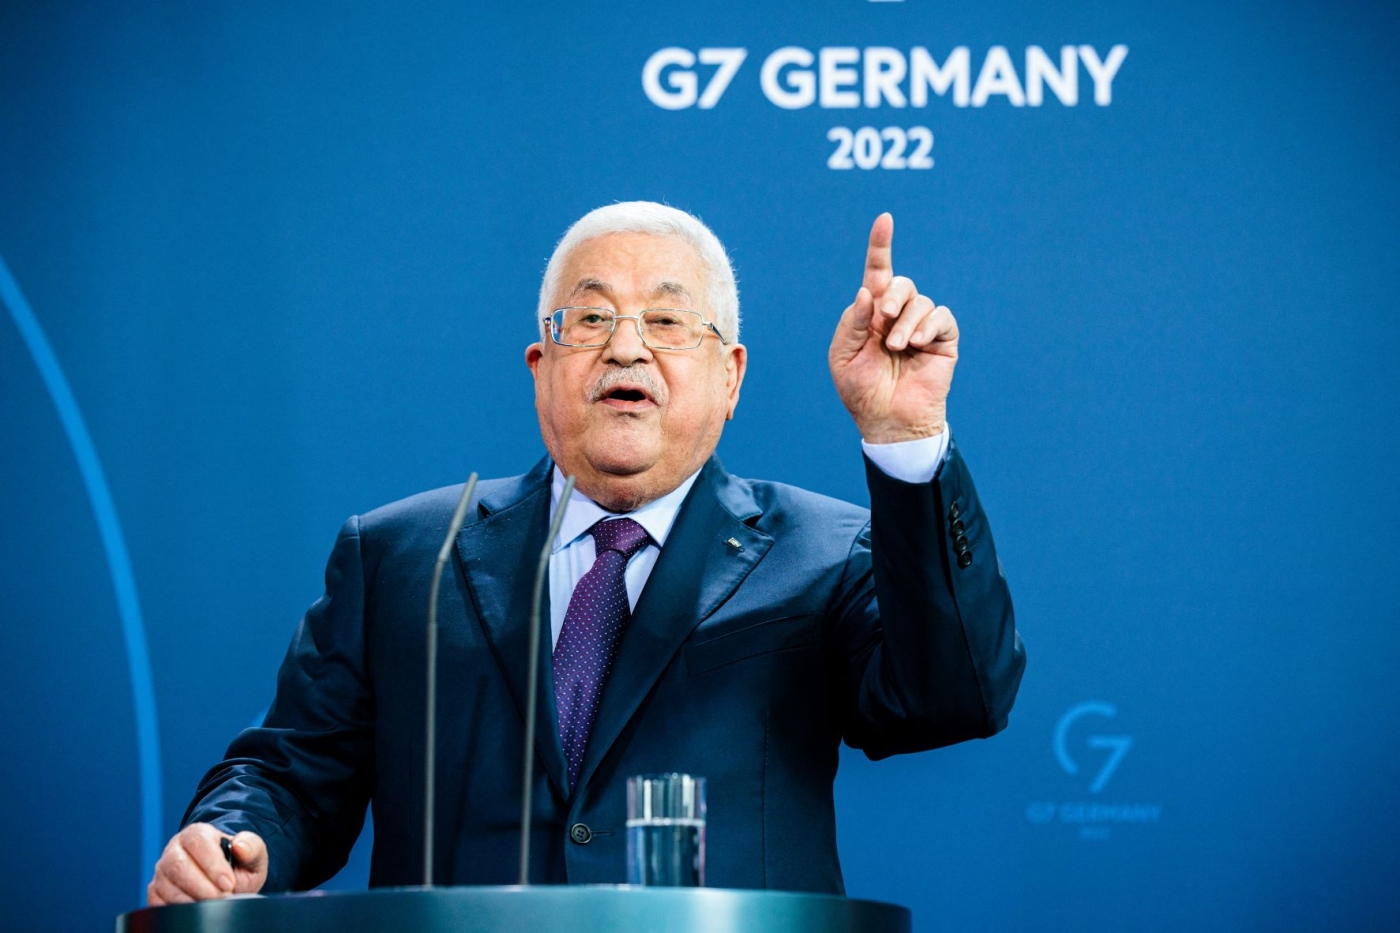 Palestinian president Mahmoud Abbas gesticulates during a joint press conference with the German Chancellor at the Chancellery in Berlin, Germany, on August 16, 2022 (AFP)